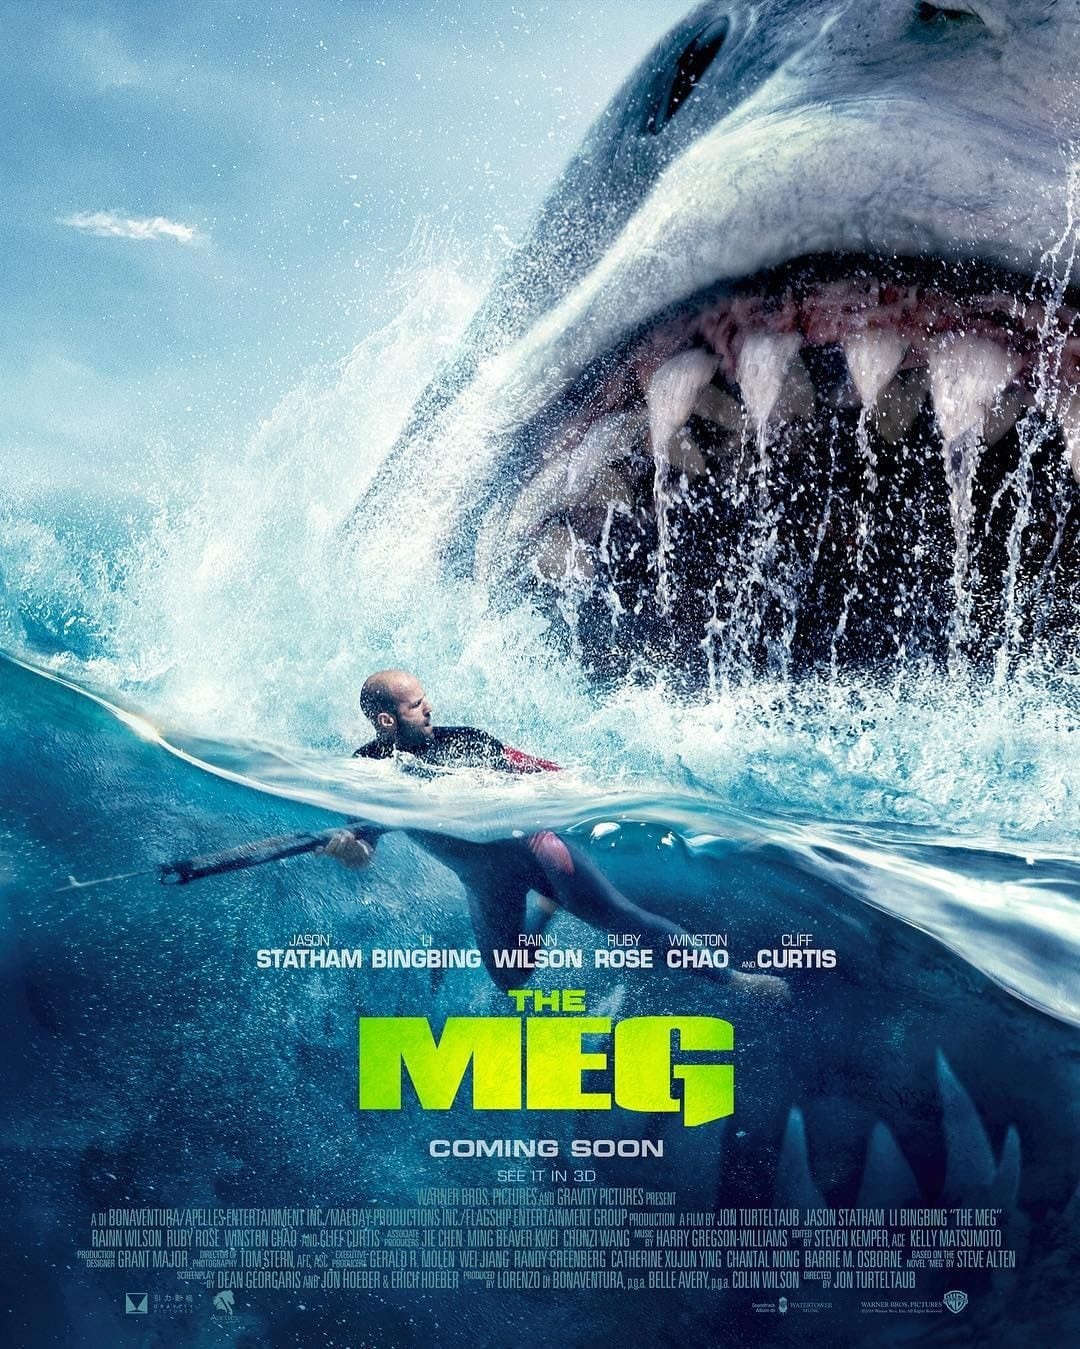 Movie Review “The Meg” does not disappoint despite its flaws The